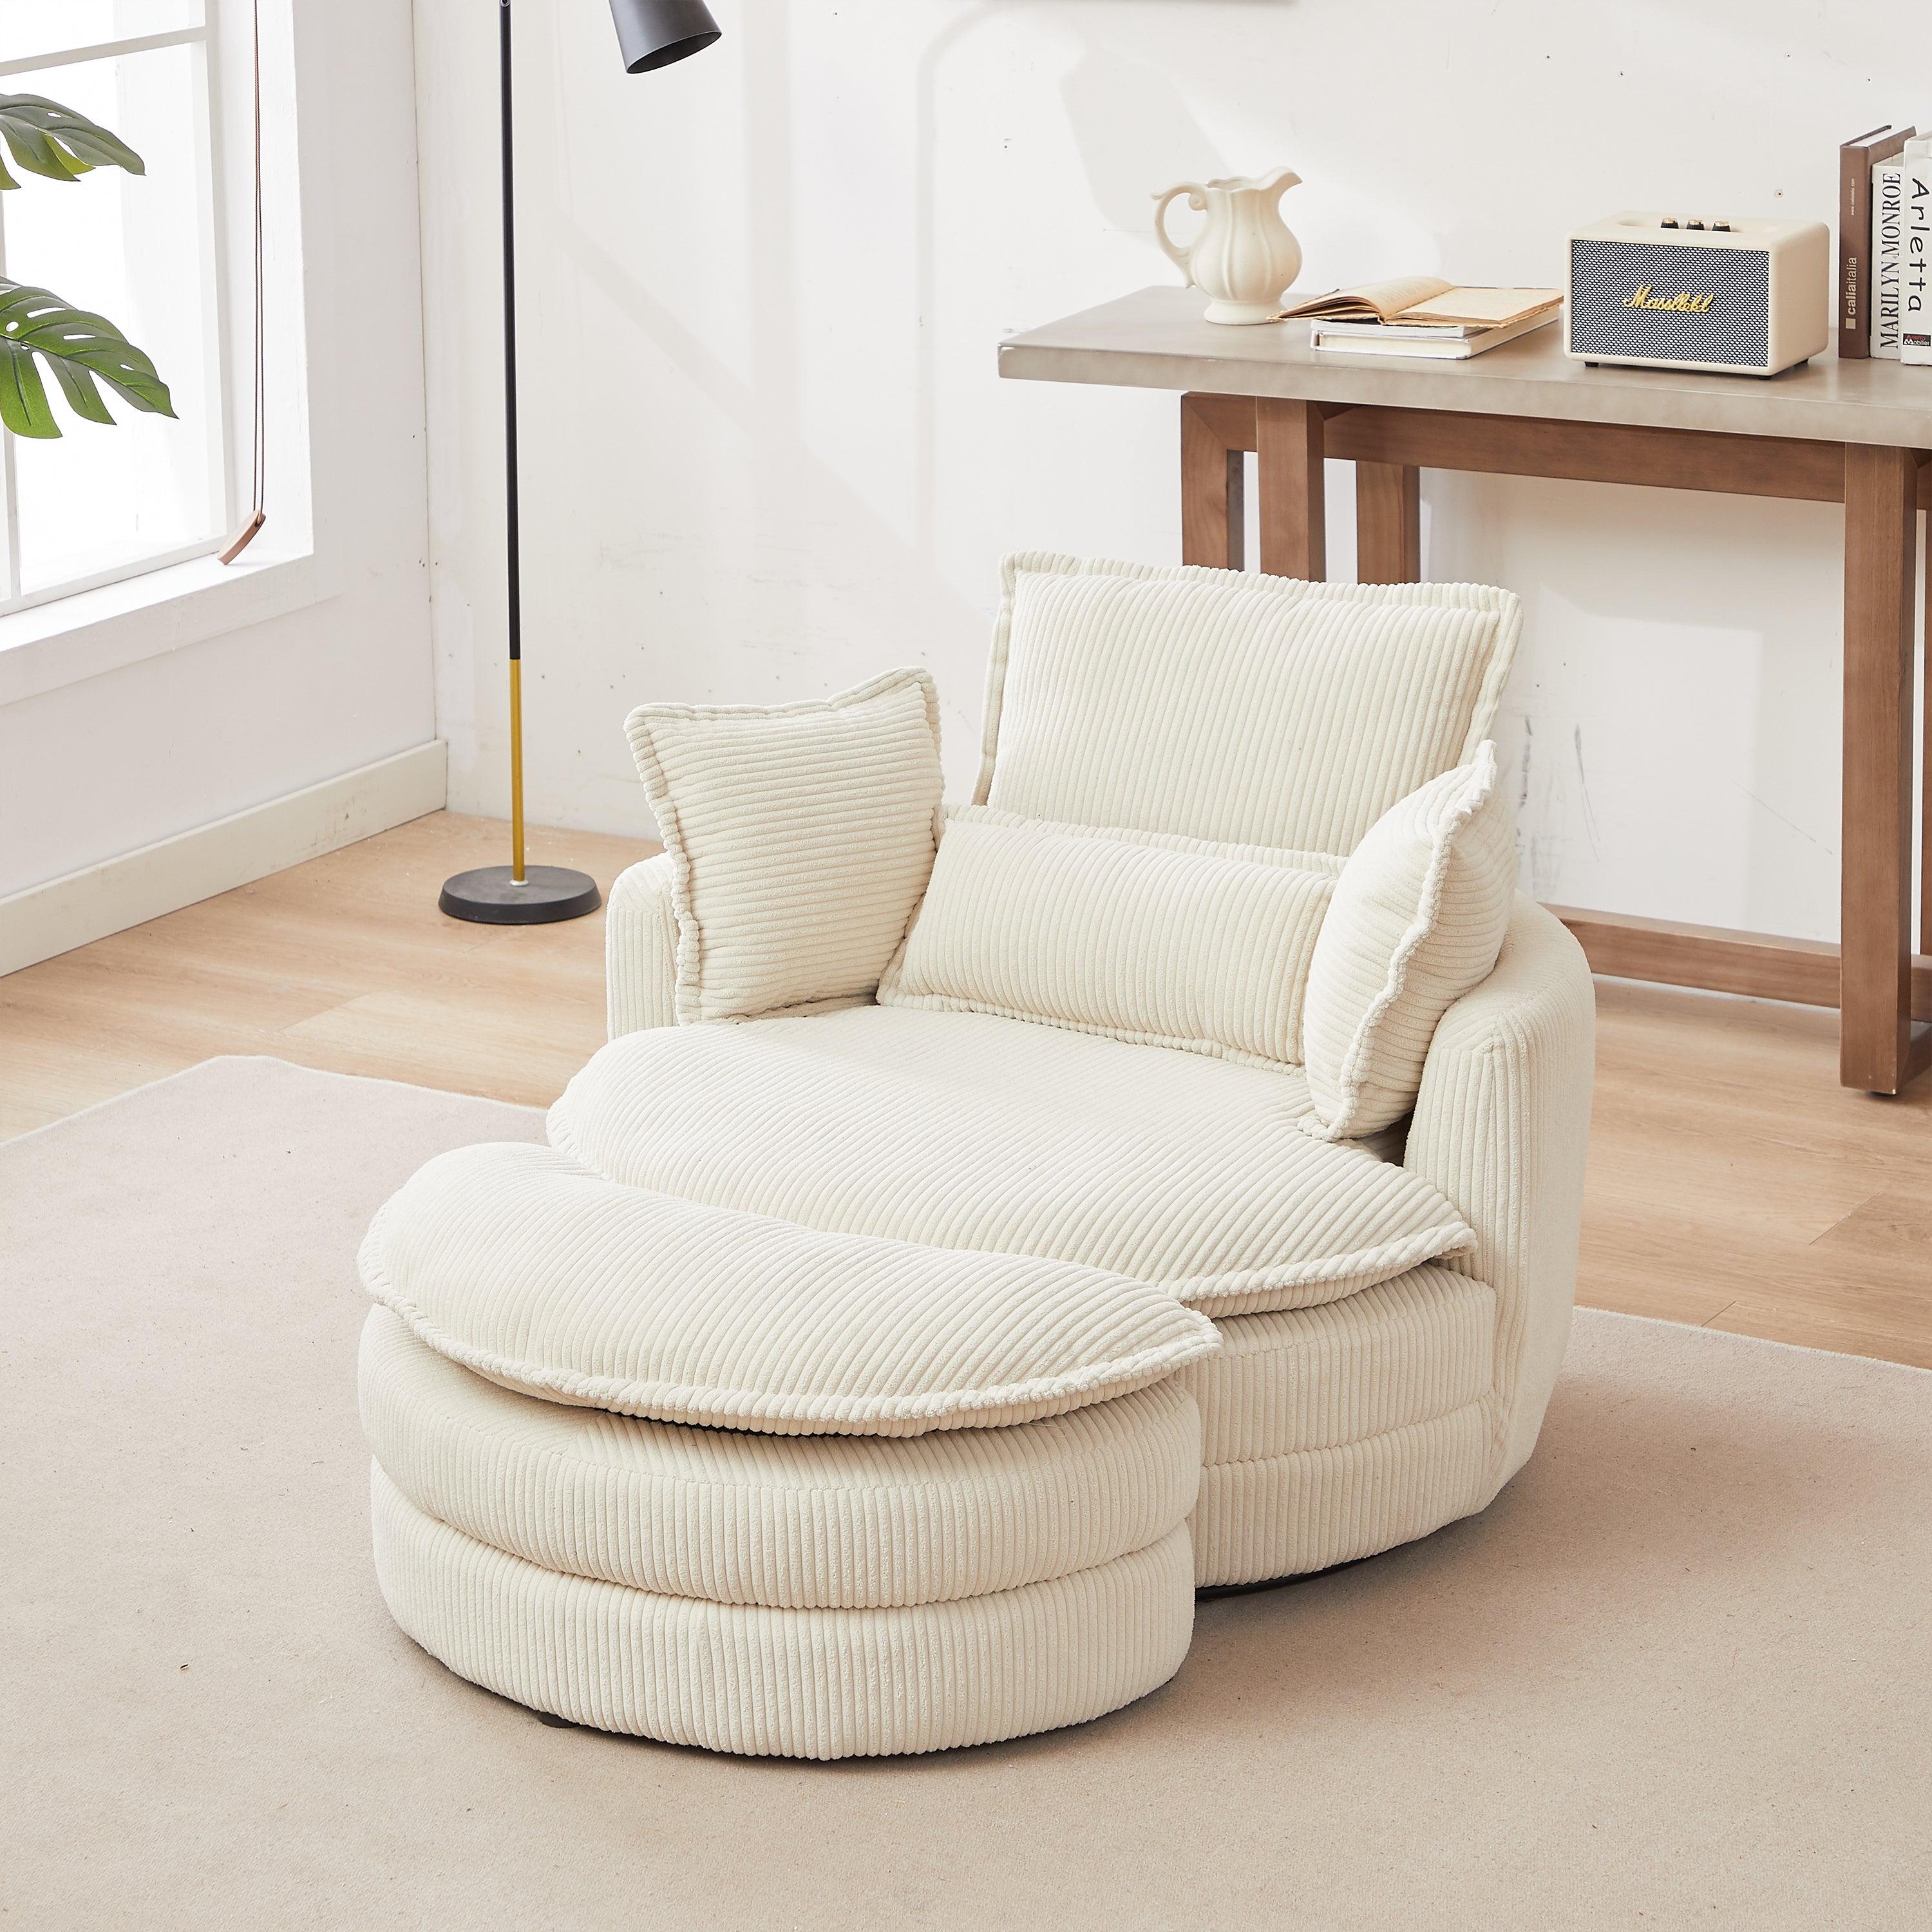 🆓🚛 38"W Oversized Corduroy Swivel Chair With Moon Storage Ottoman for Living Room, Beige